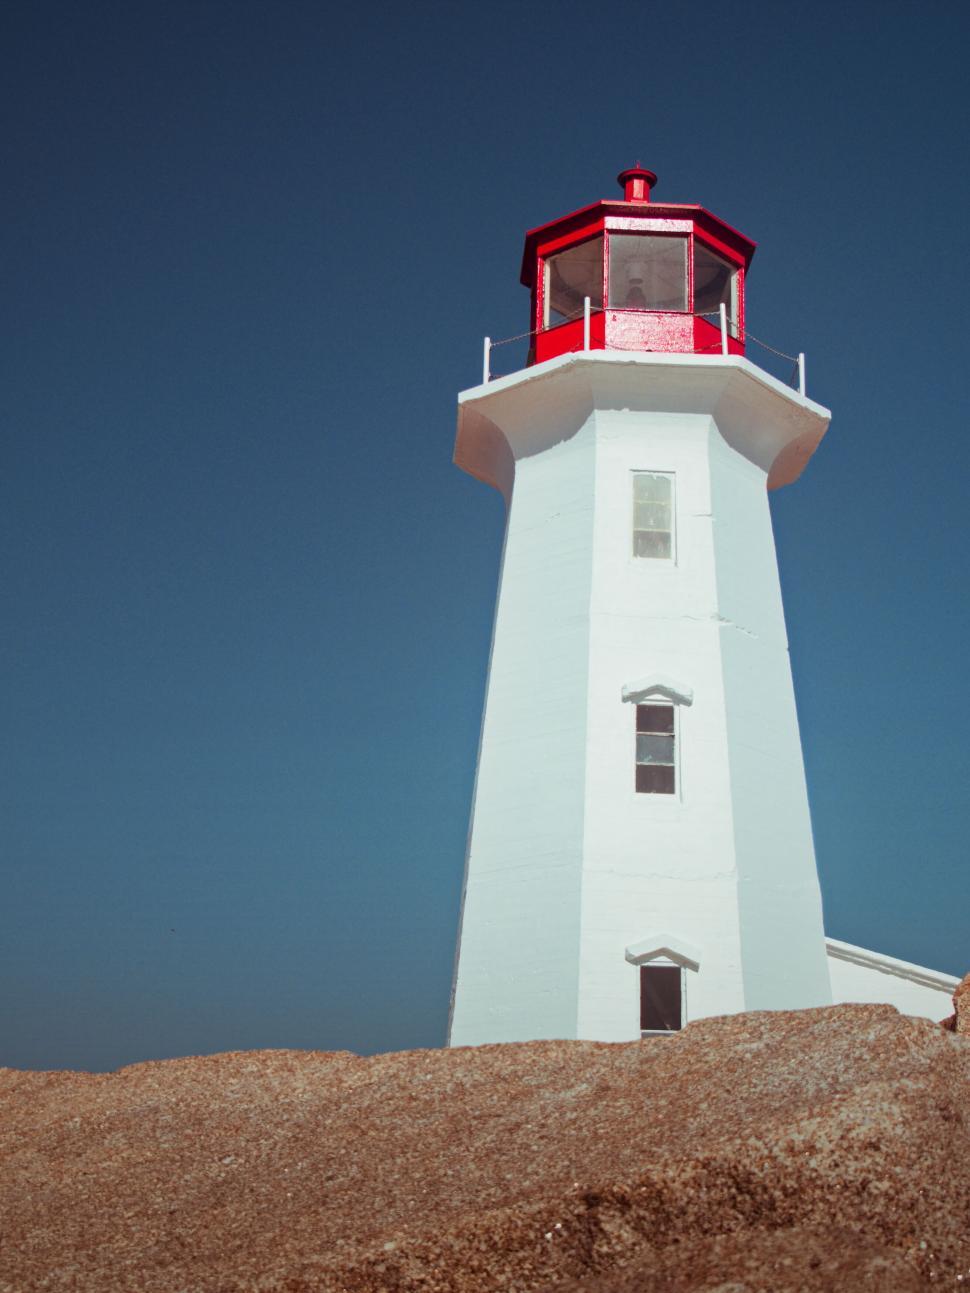 Free Image of Red-topped lighthouse standing by the sea 